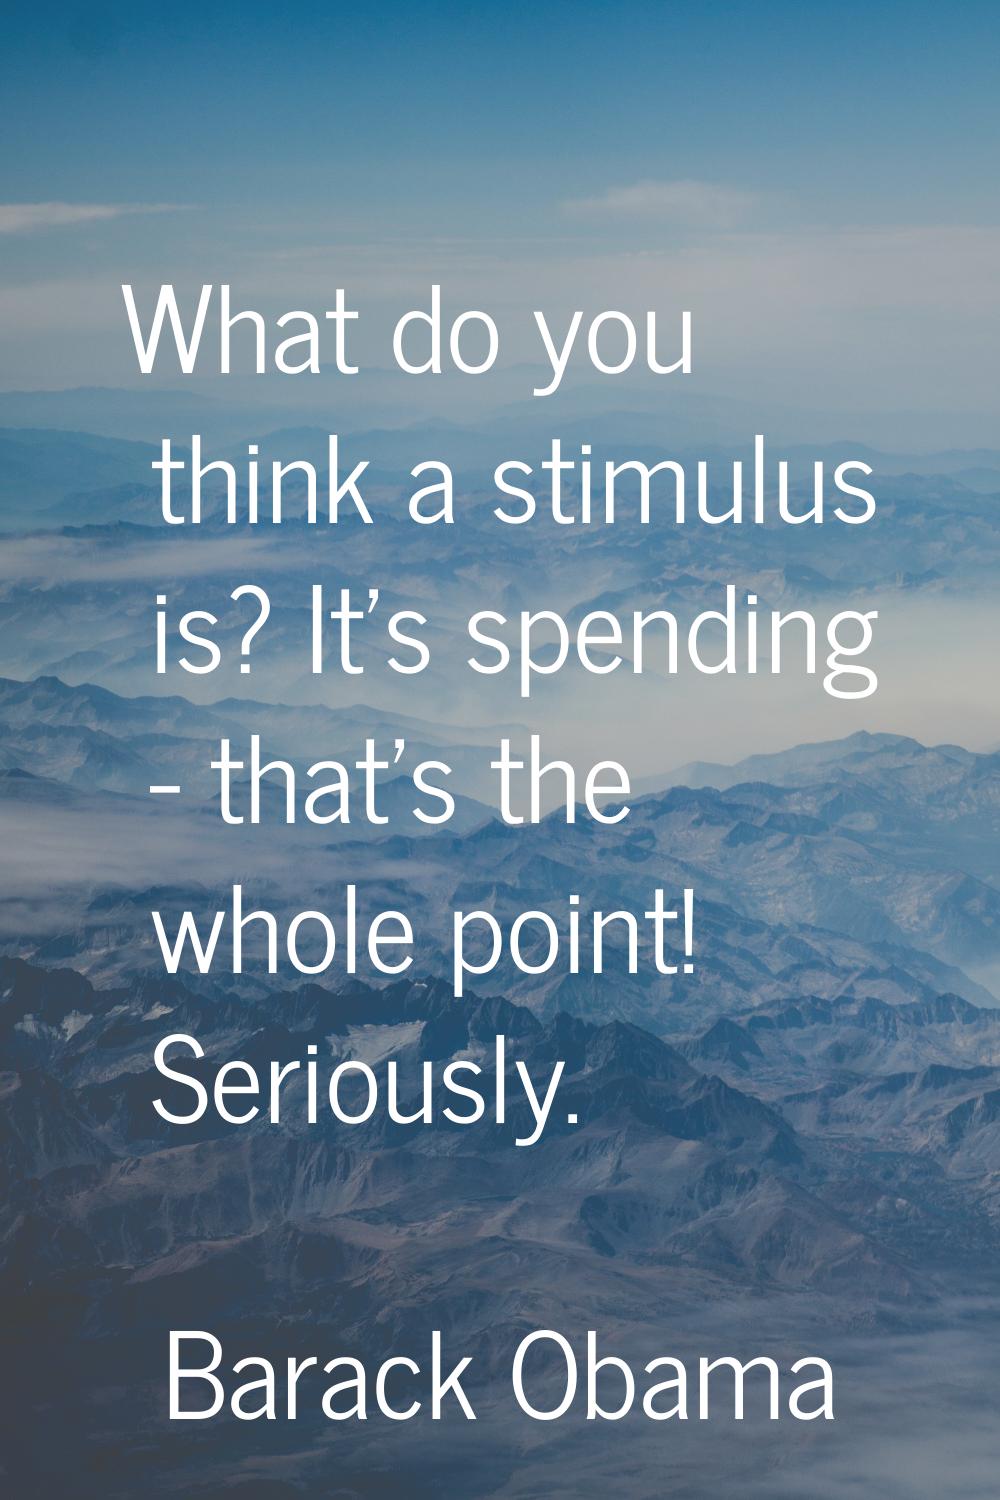 What do you think a stimulus is? It's spending - that's the whole point! Seriously.